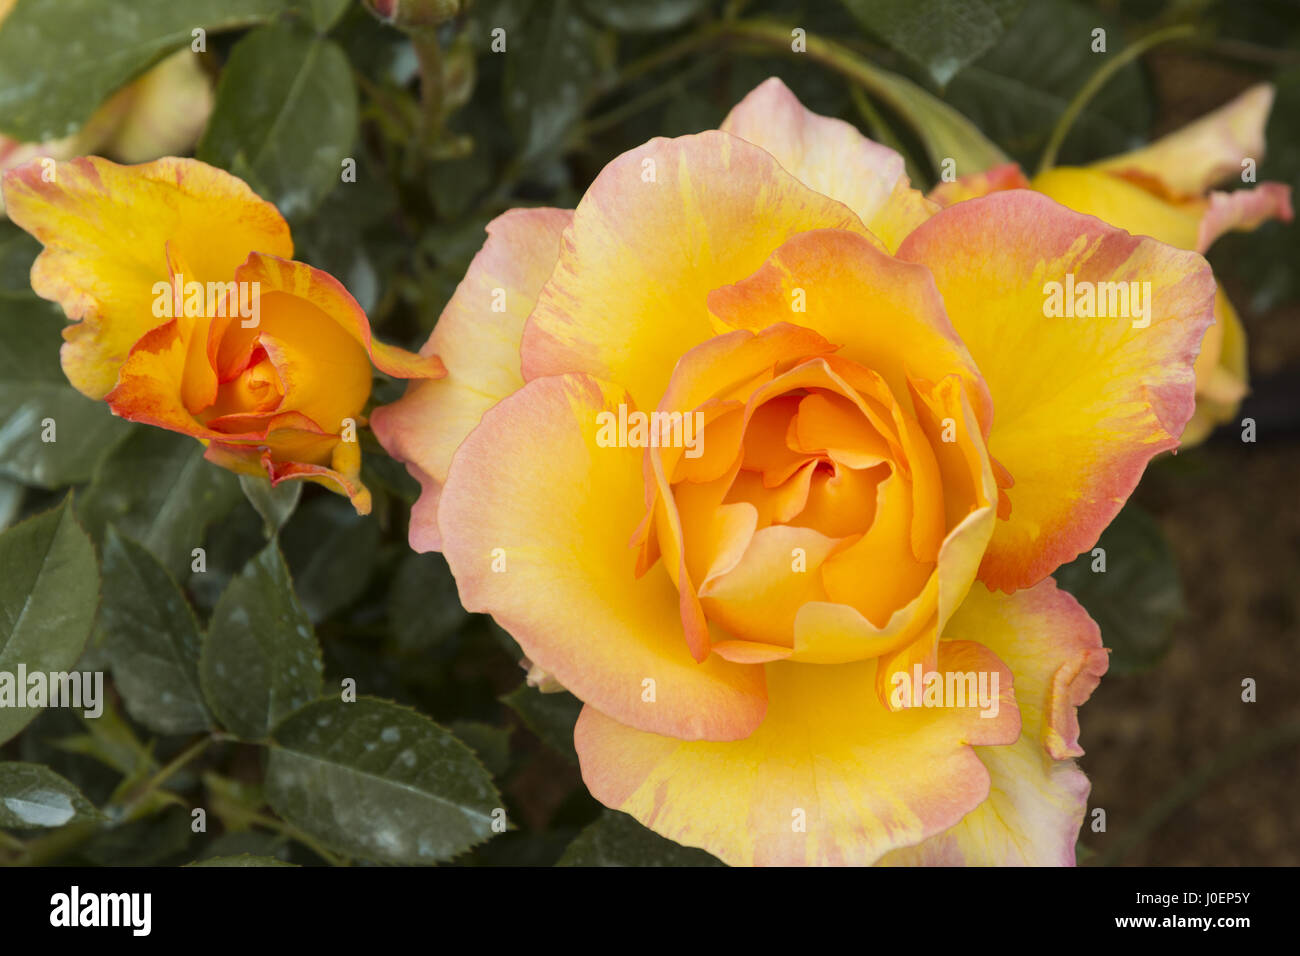 France, Narbonne, Fontfroide Abbey, rose garden, yellow rose with pink highlights Stock Photo